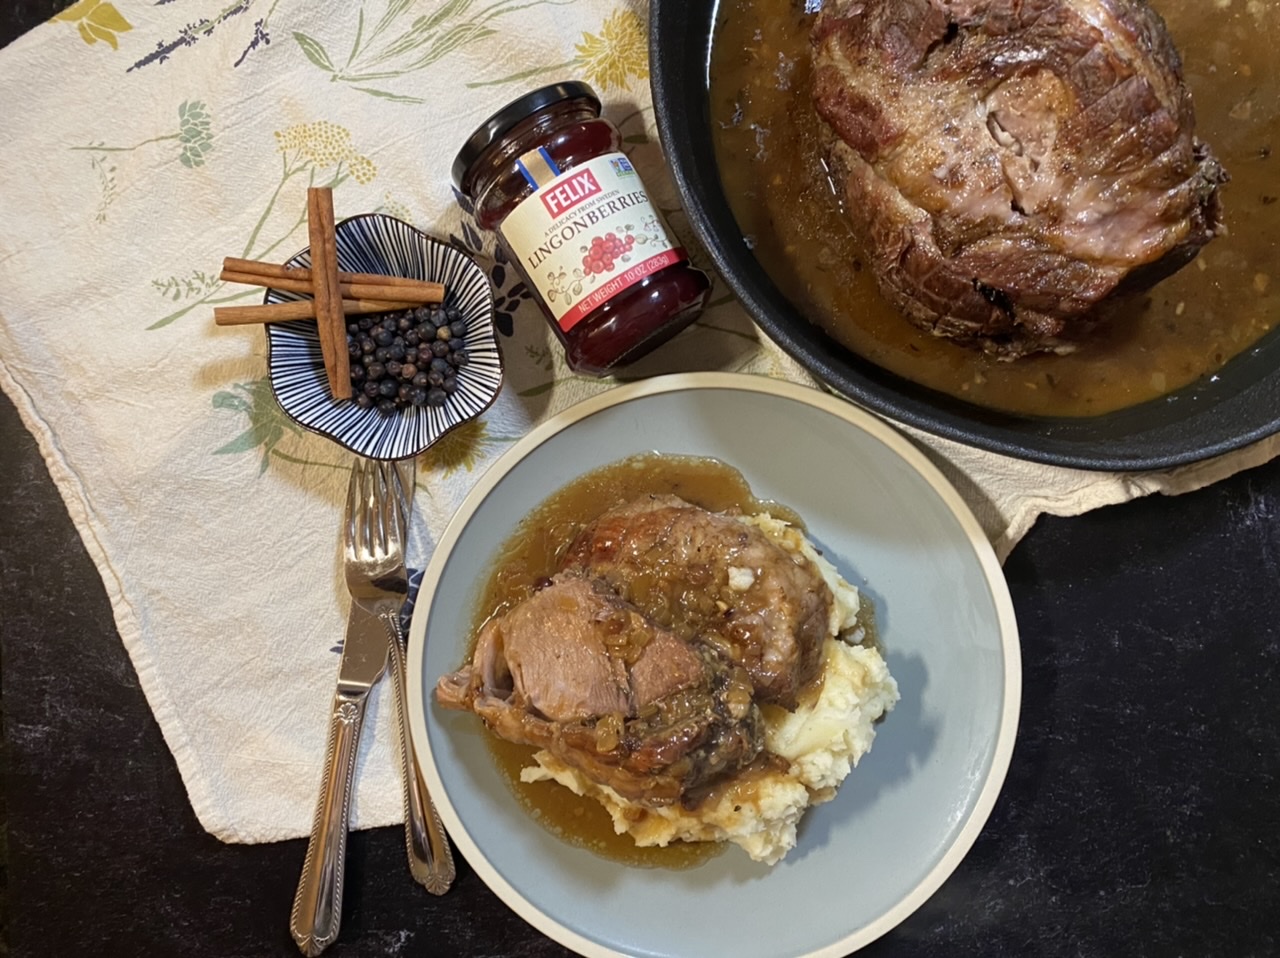 Roast pork on top of mashed potatoes with lingonberry gravy on top of a blue plate